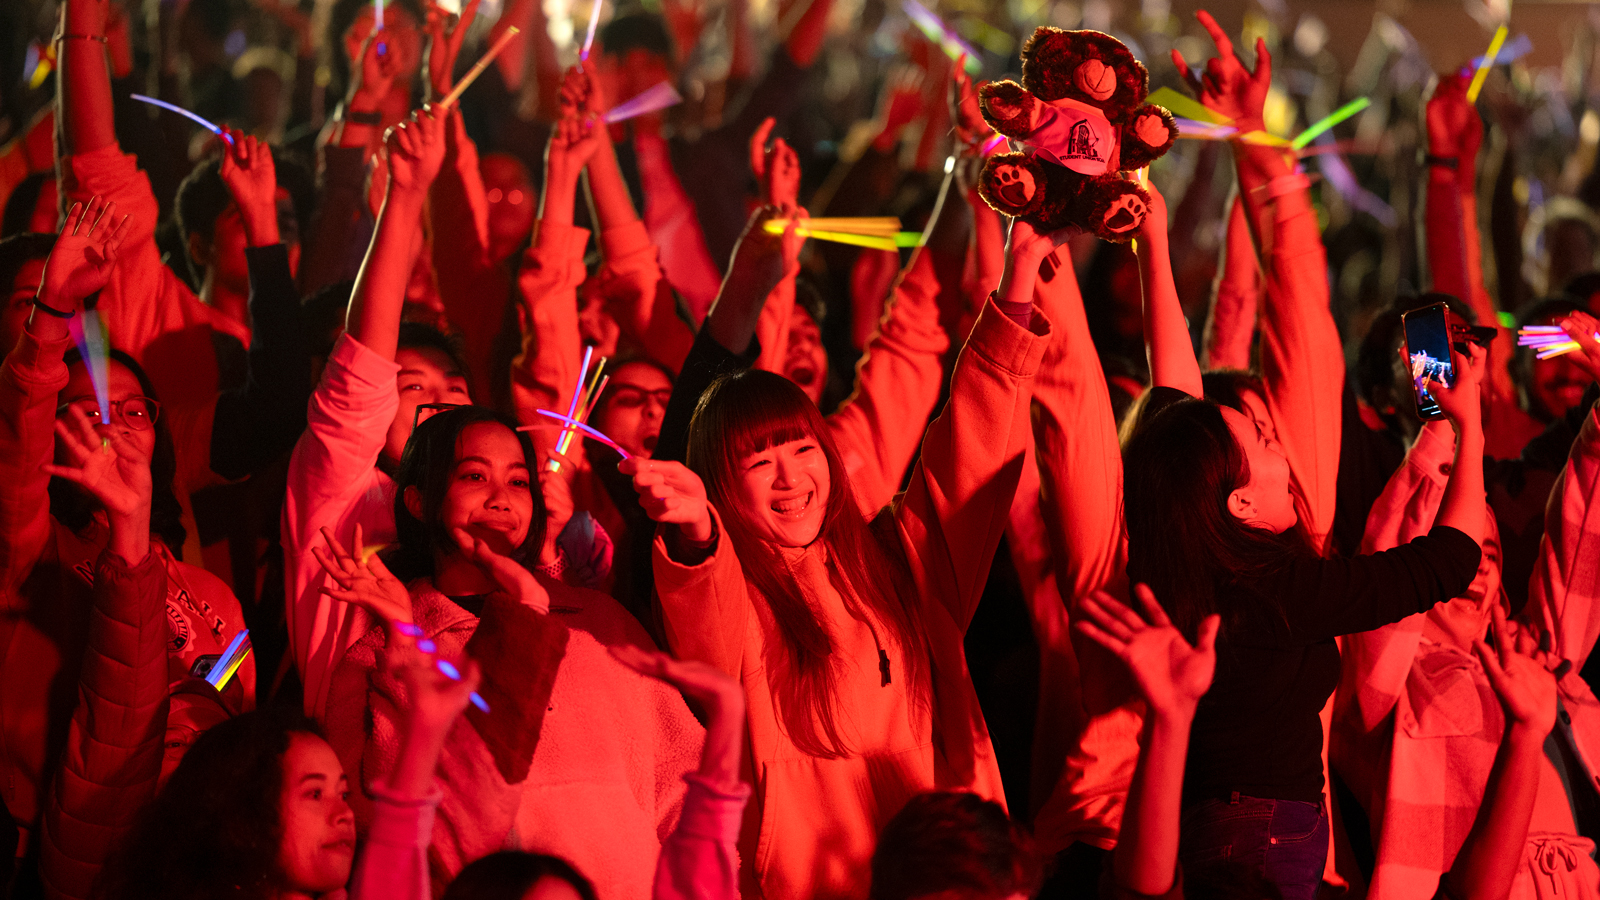 revelers are bathed in red light during the Homecoming fireworks and laser light show in Schoellkopf Stadium